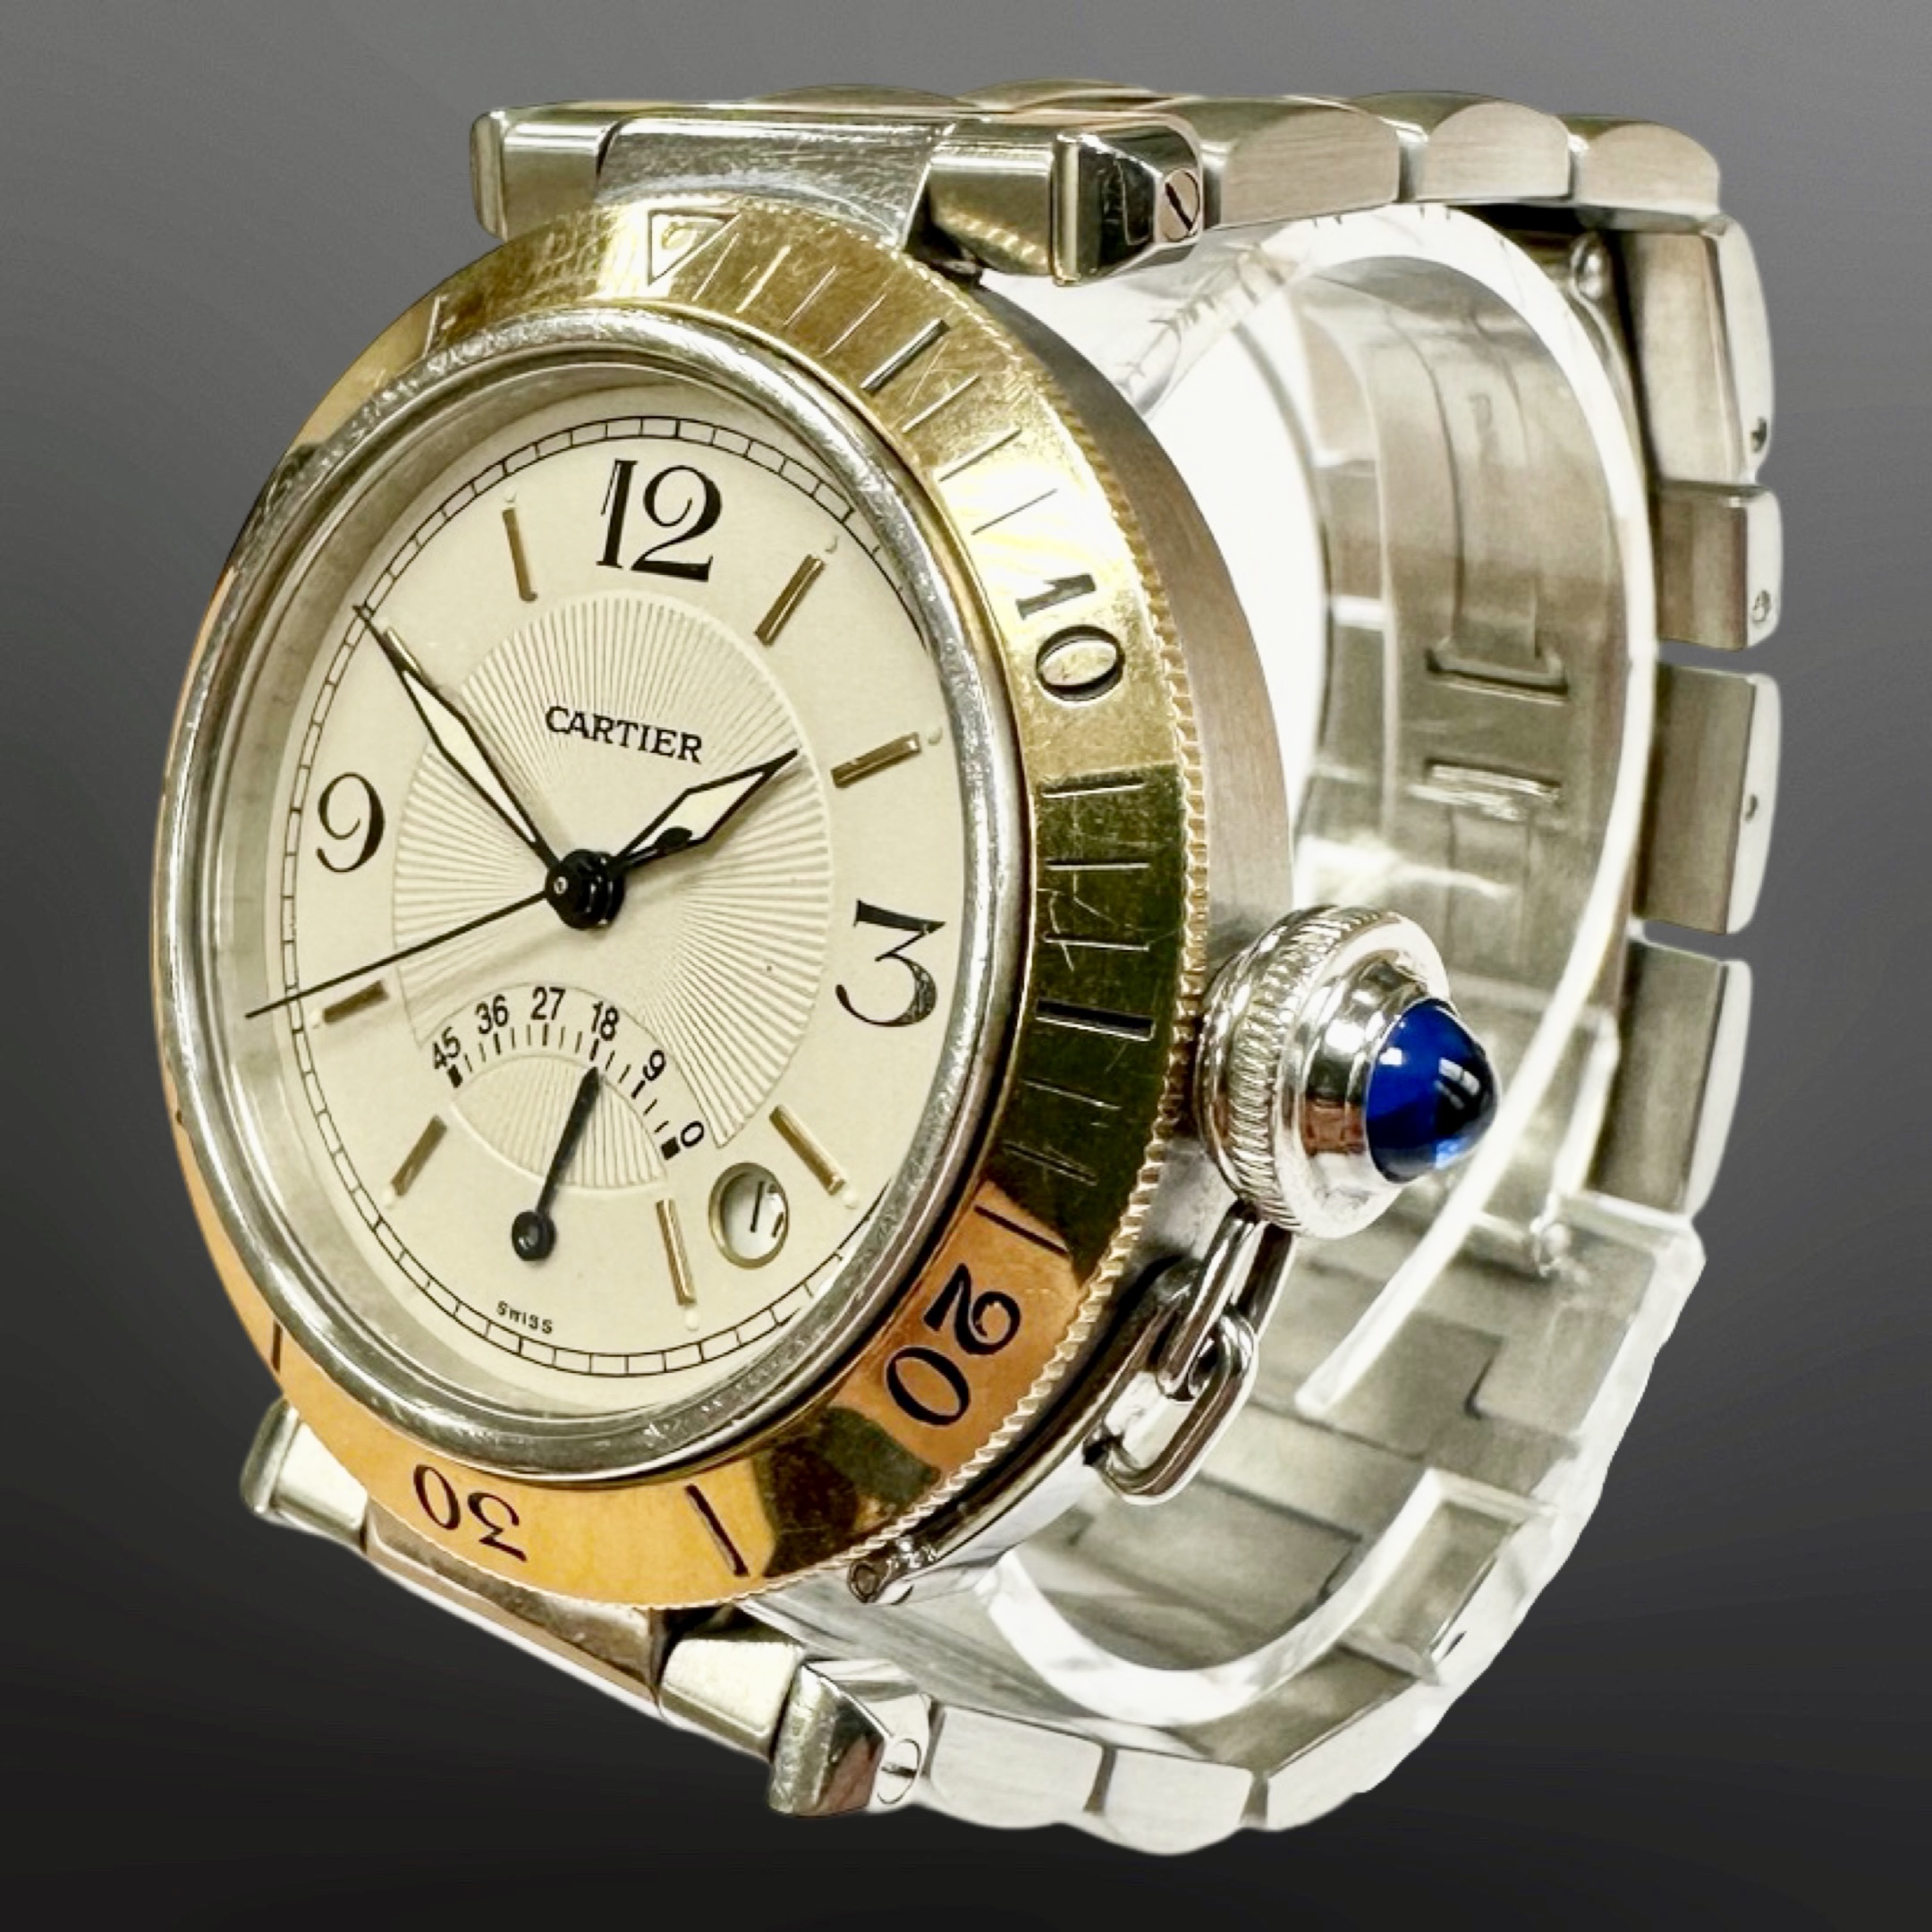 Cartier Pasha 18ct gold and stainless steel automatic wristwatch with power reserve indication, - Image 2 of 5